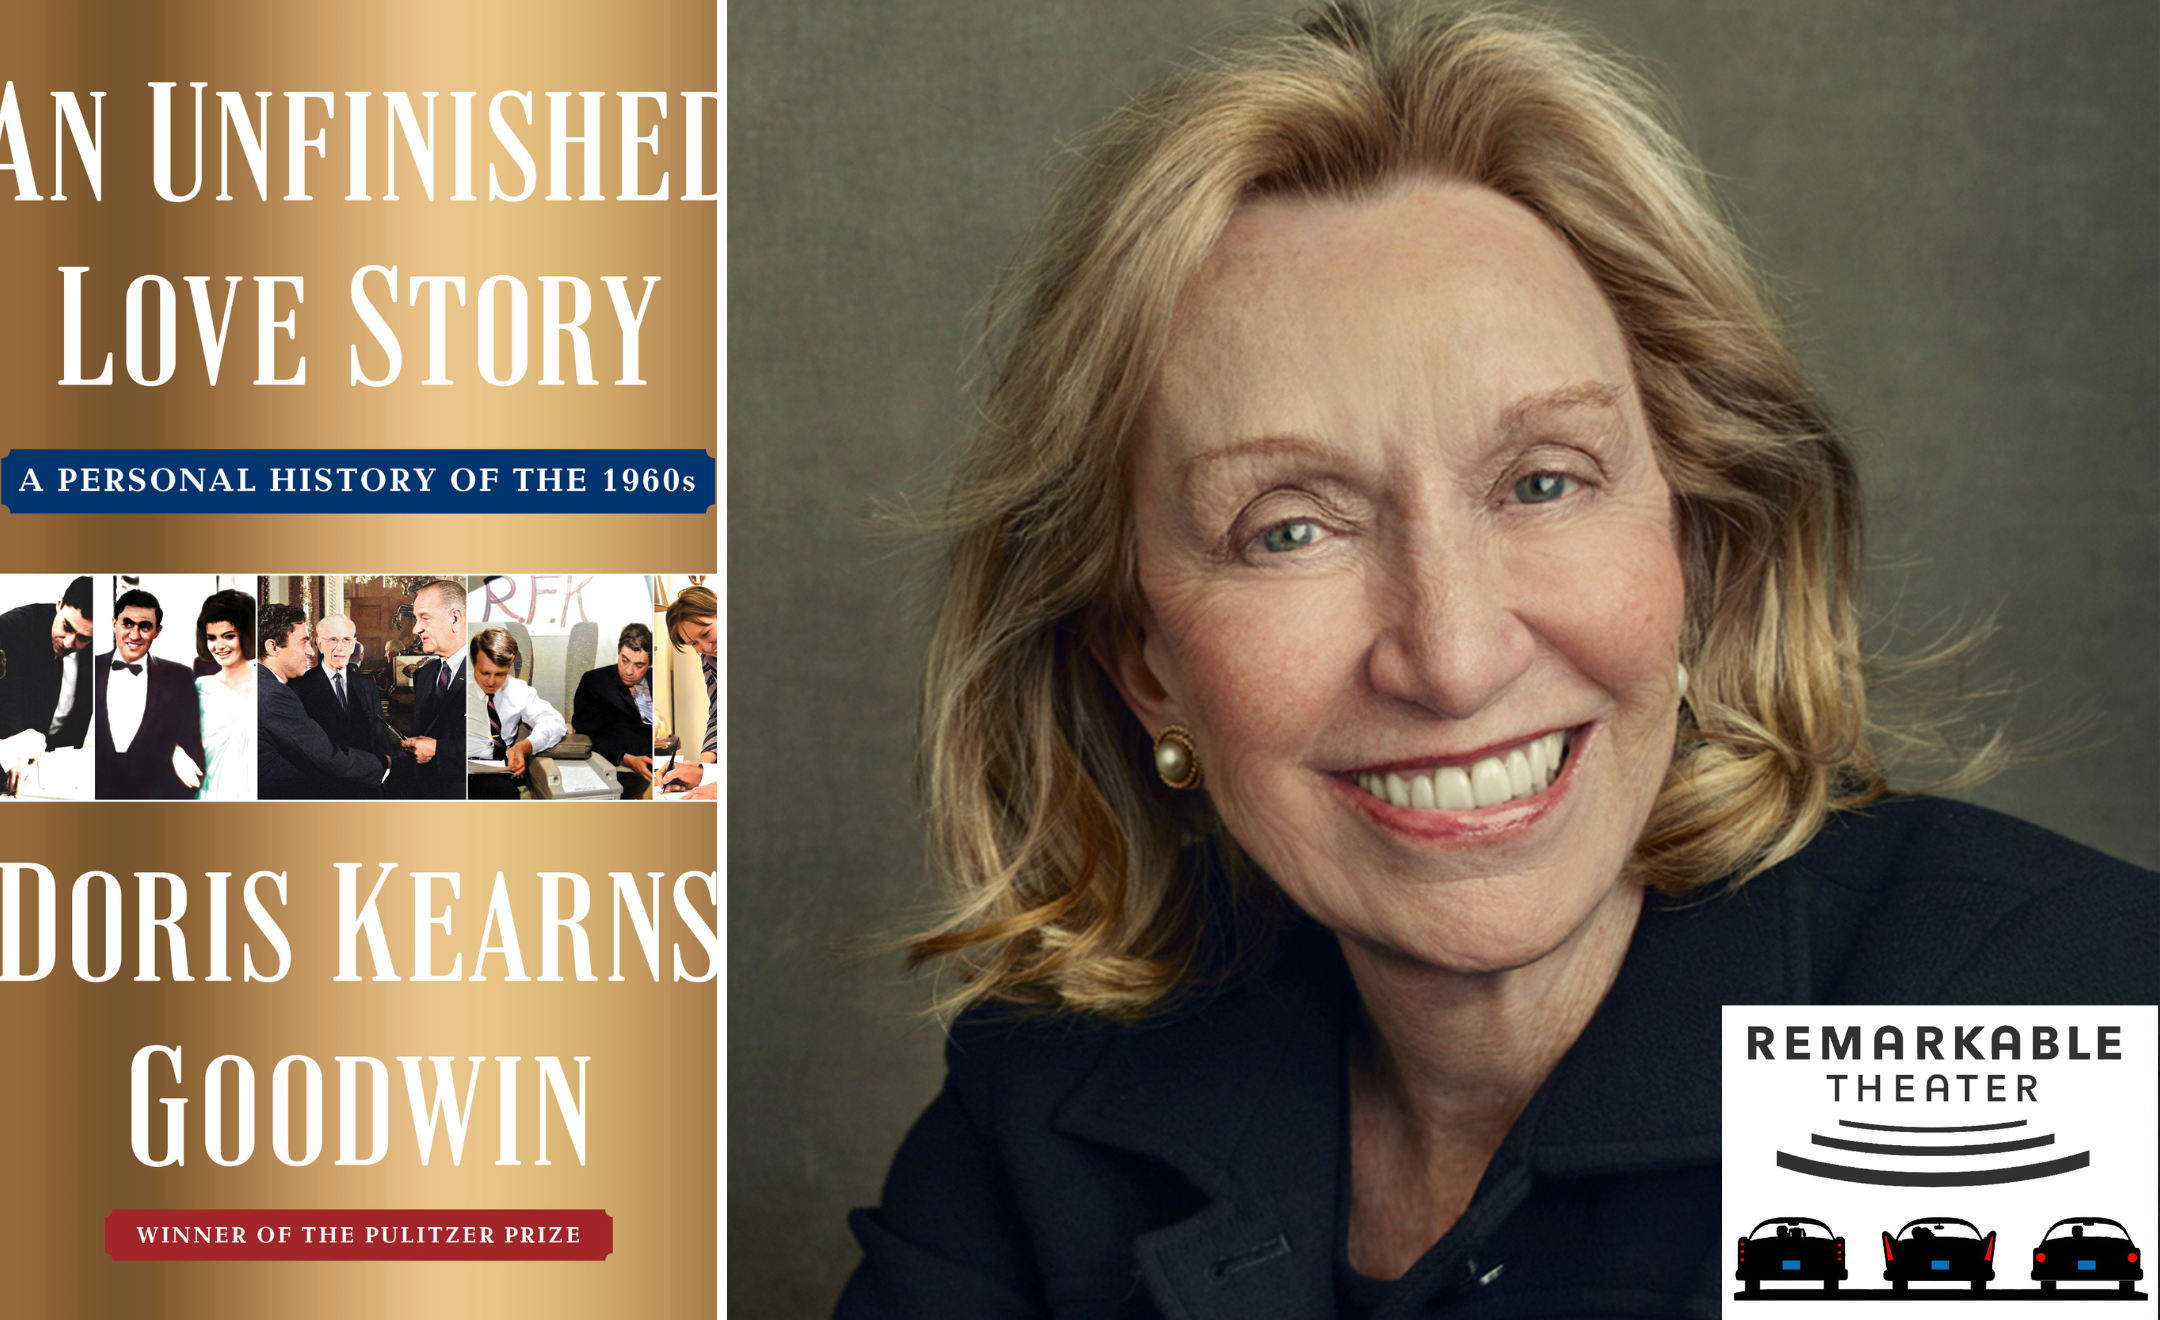 L to R: Book cover for "An Unfinished Story" and head shot of Doris Kearns Goodwin